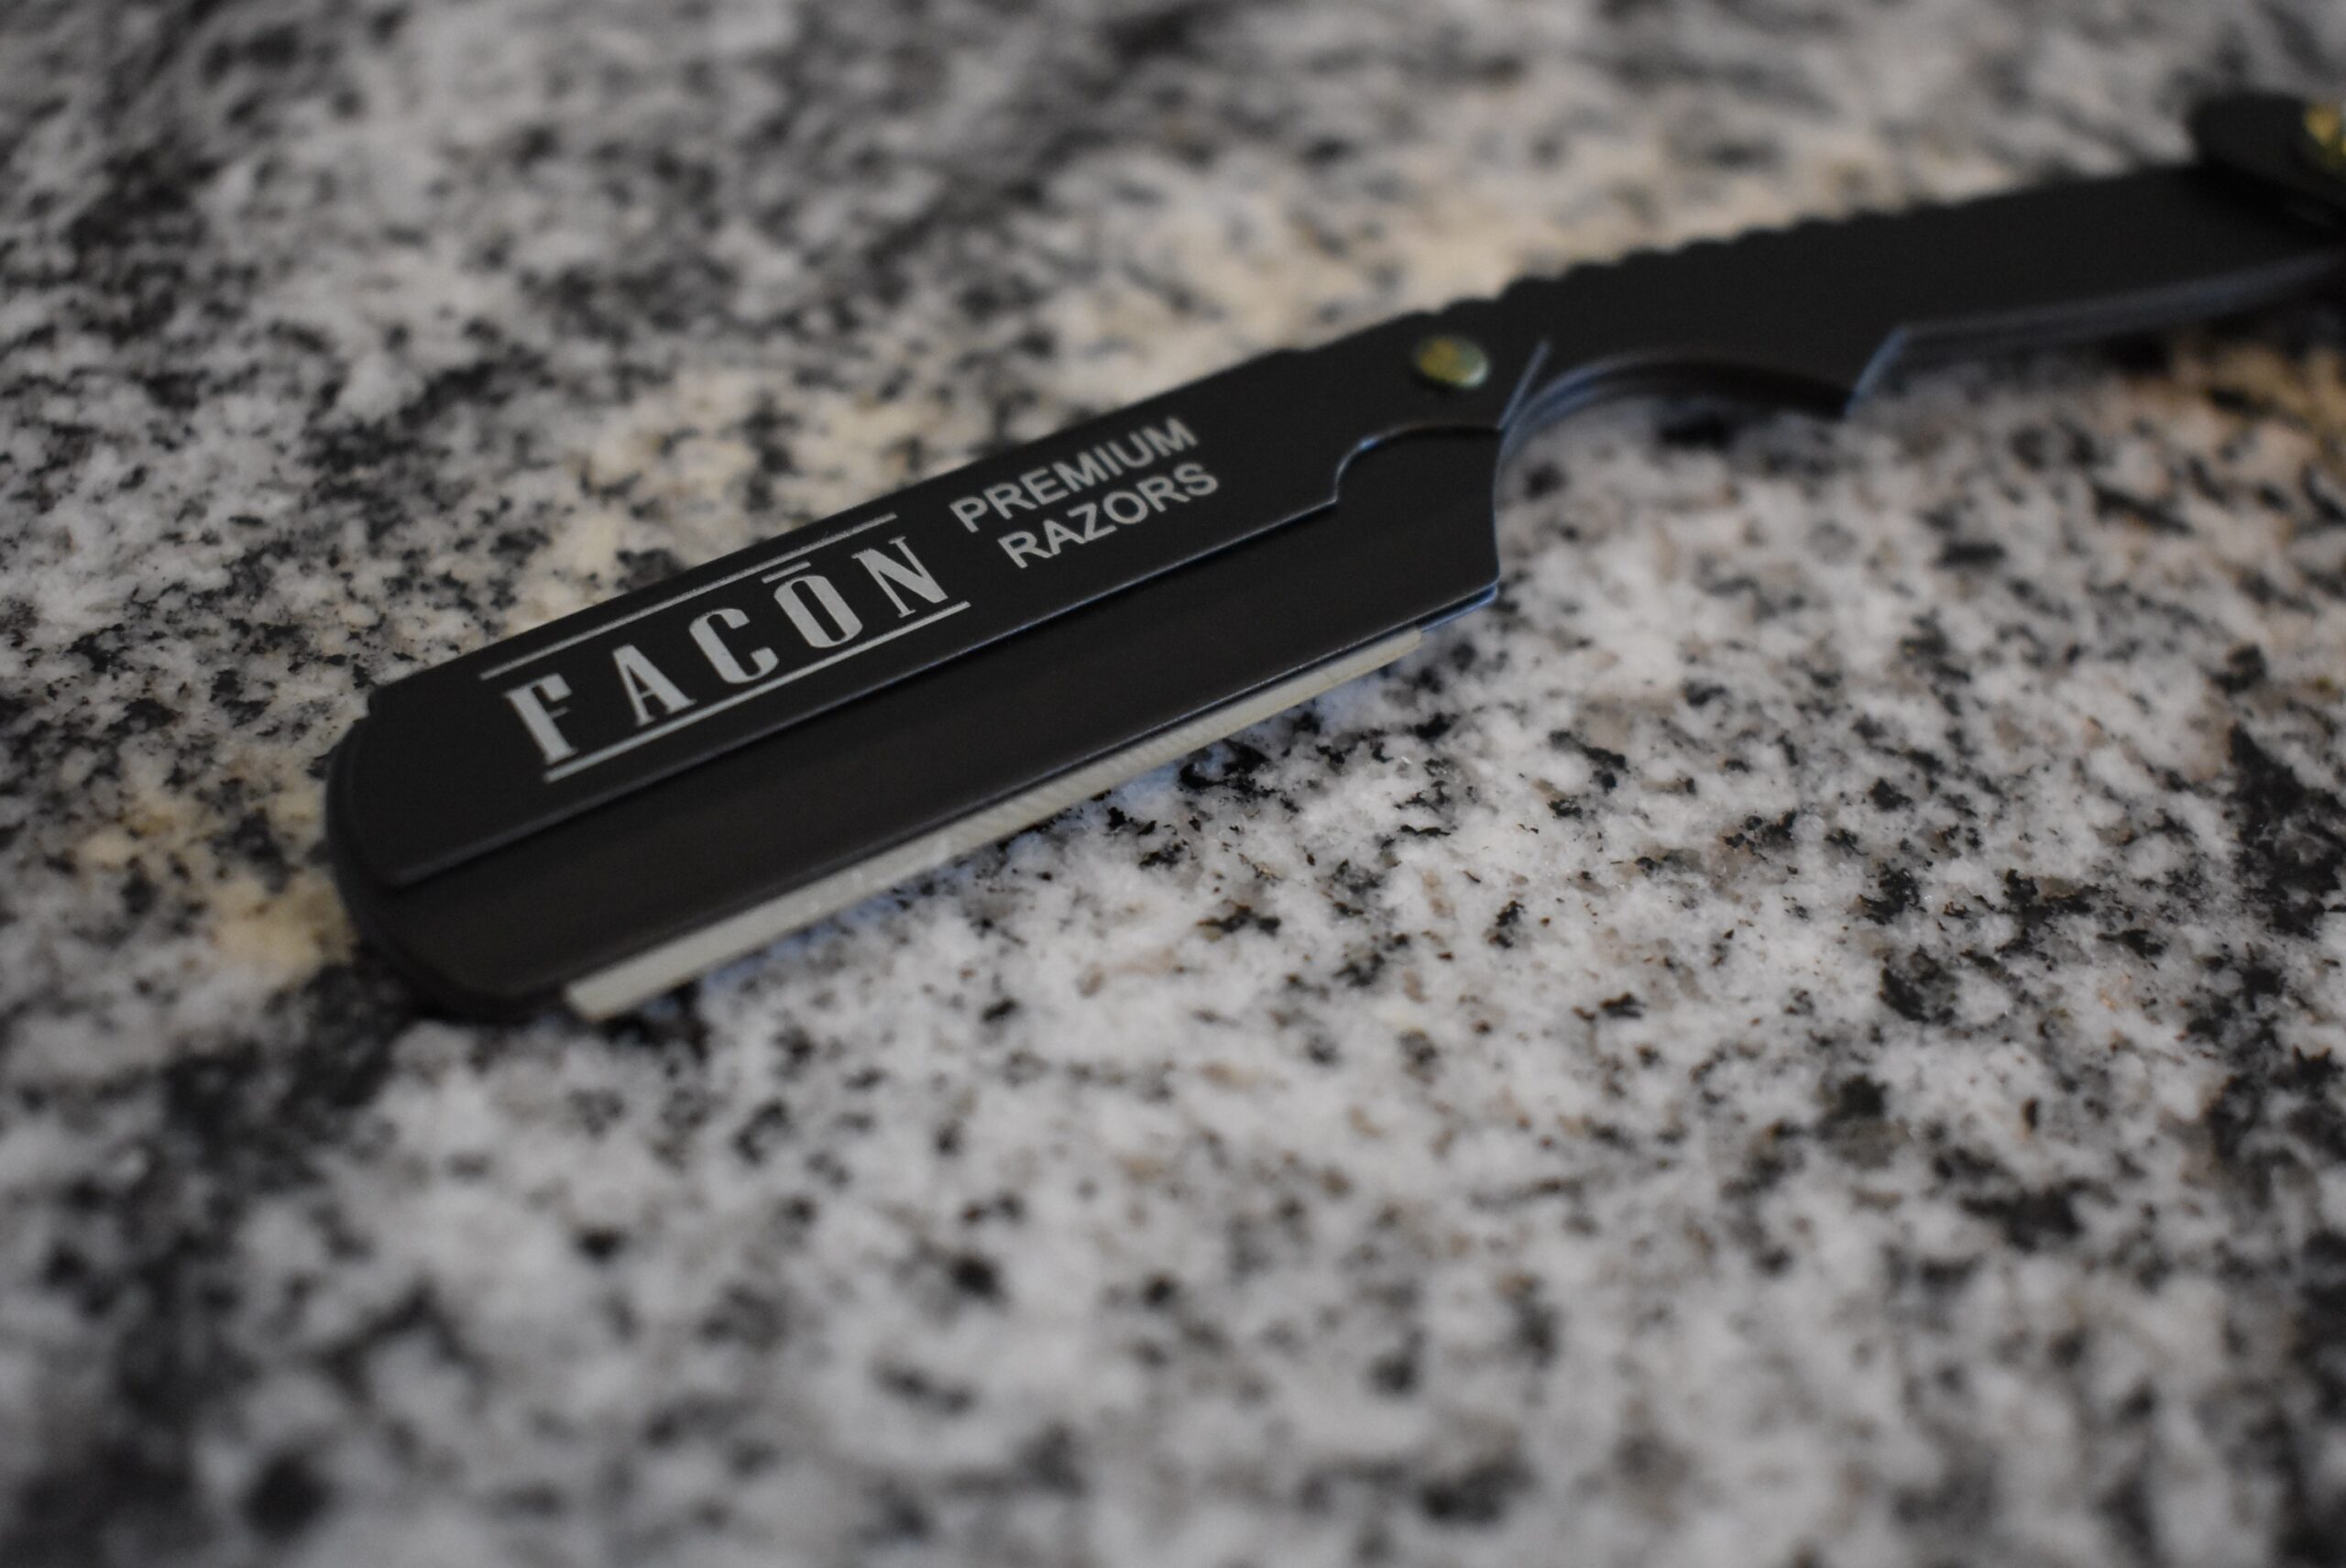 Facon straight razor close up (one of the best) with a blade in its clamp